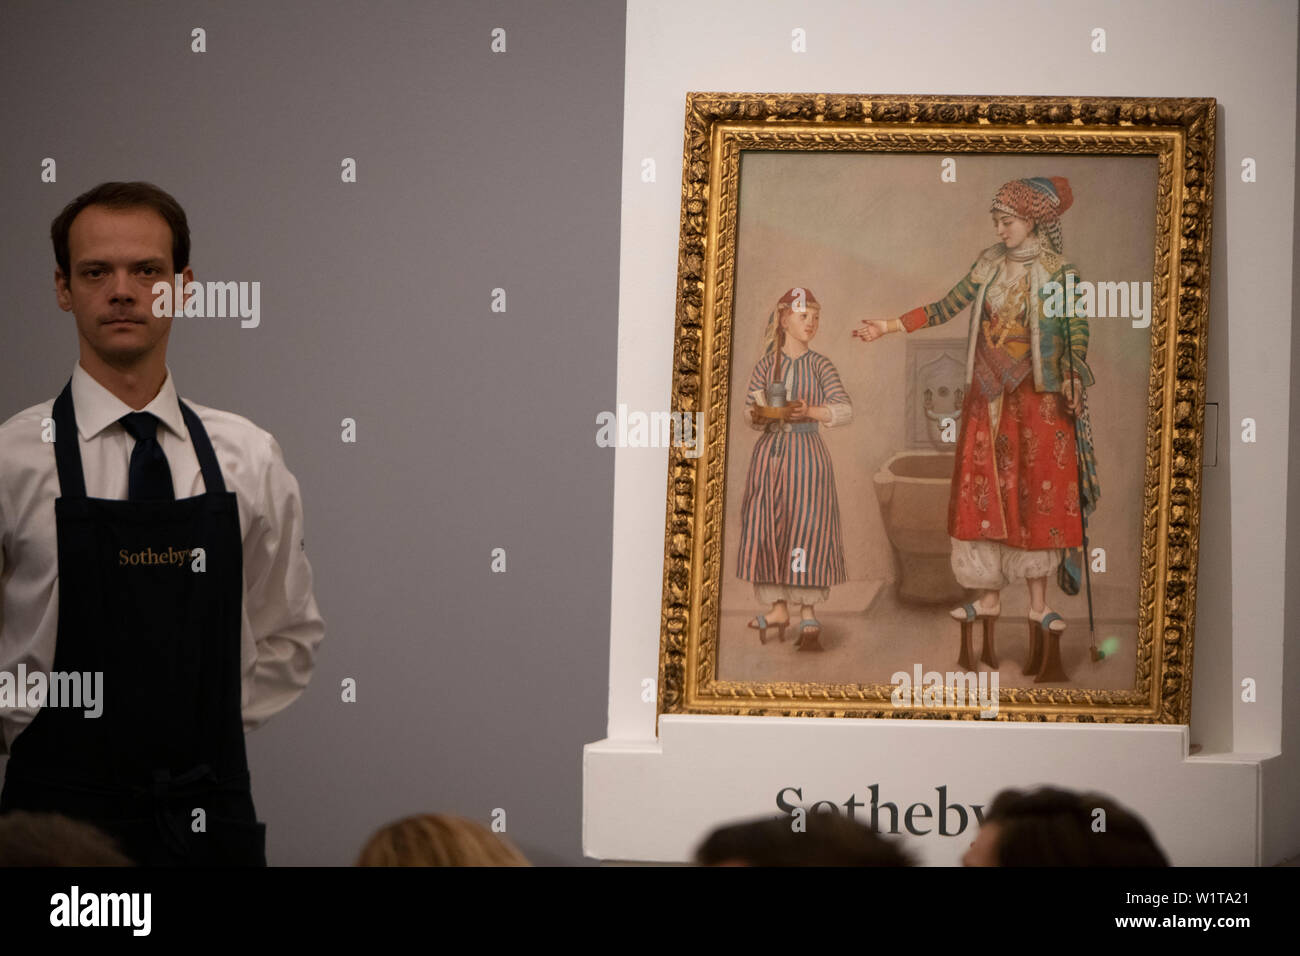 Sotheby’s, London, UK. 3rd July 2019. The summer Old Masters Evening sale offers paintings from the 14th - 19th century by many of the most important painters of Western art. Highlights include a masterpiece by each of Britain’s greatest landscape painters - Turner, Constable and Gainsborough - and extraordinary works from the Baroque by Ribera and the exceptionally rare Johann Liss. Image: Jean-Etienne Liotard, A Woman in Turkish costume in a Hamam instructing a Servant, sells for £2,355,000. Credit: Malcolm Park/Alamy Live News. Stock Photo